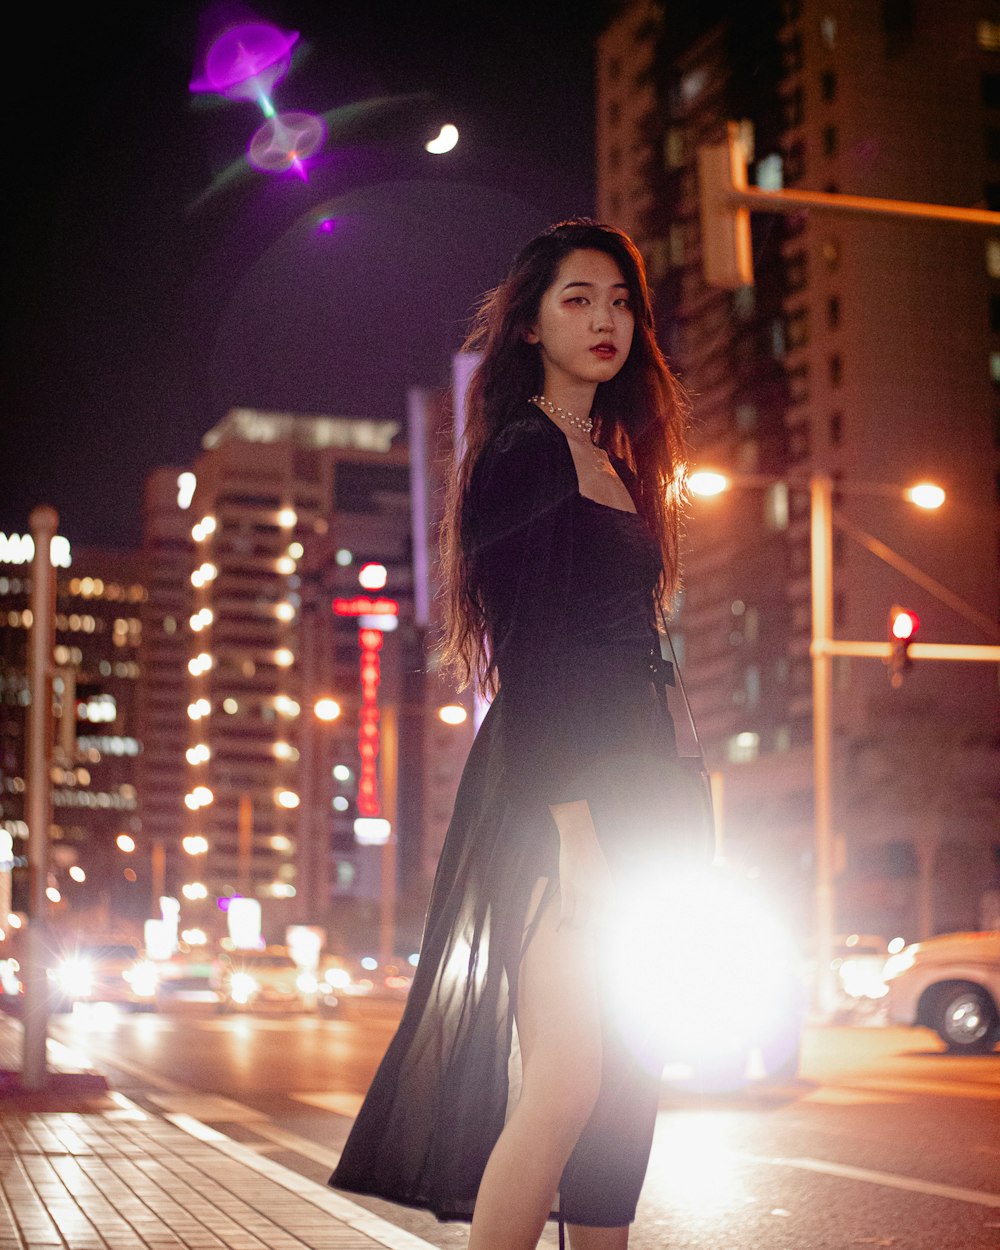 woman in black dress standing on street during night time